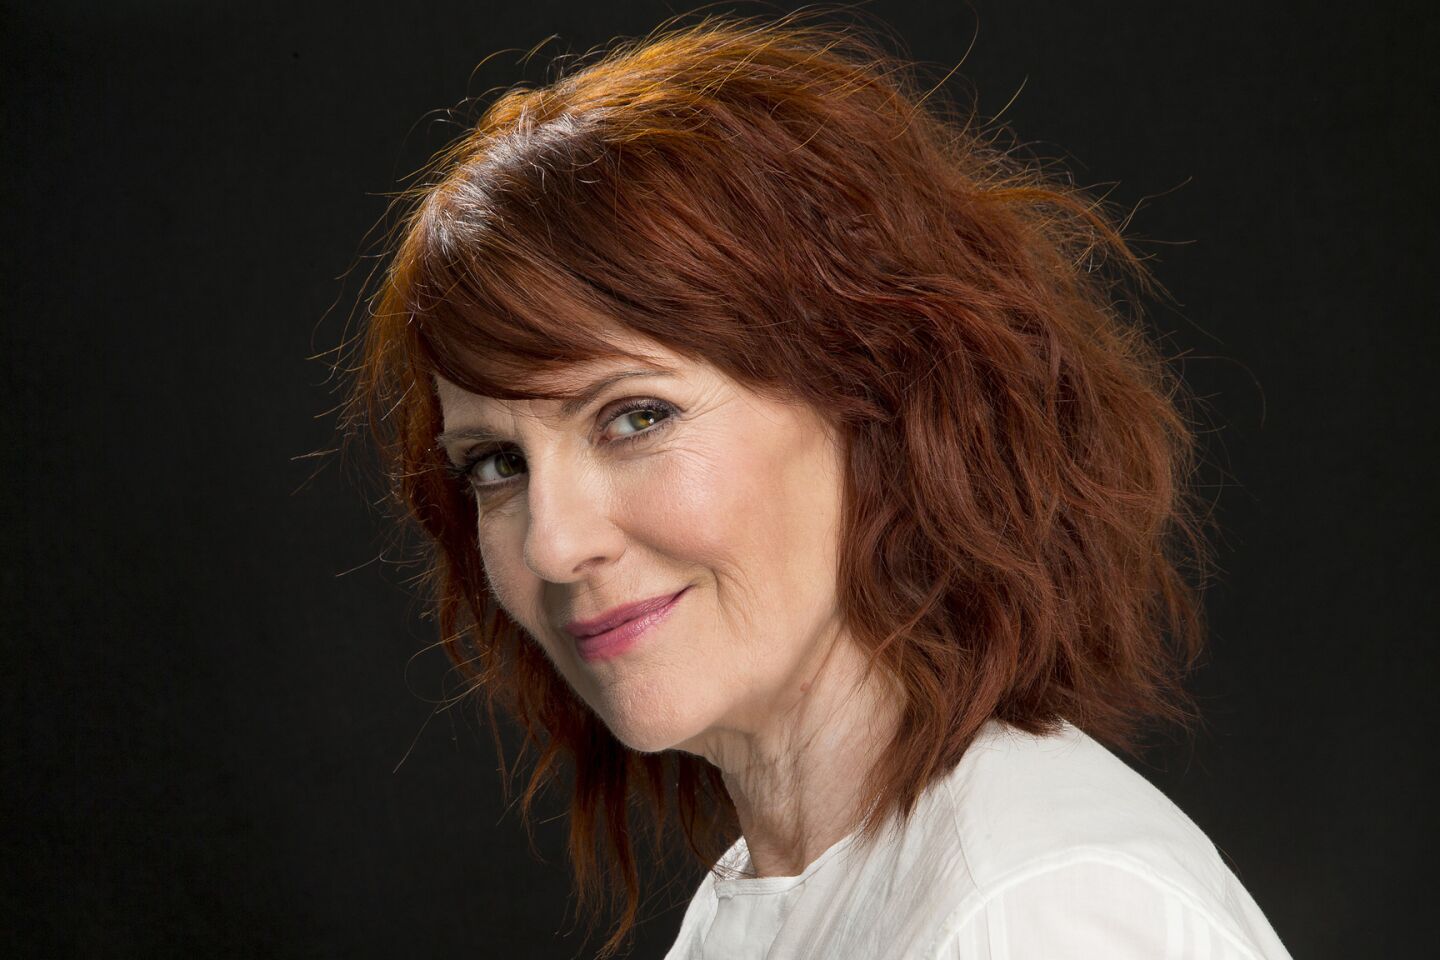 Celebrity portraits by The Times | Megan Mullally